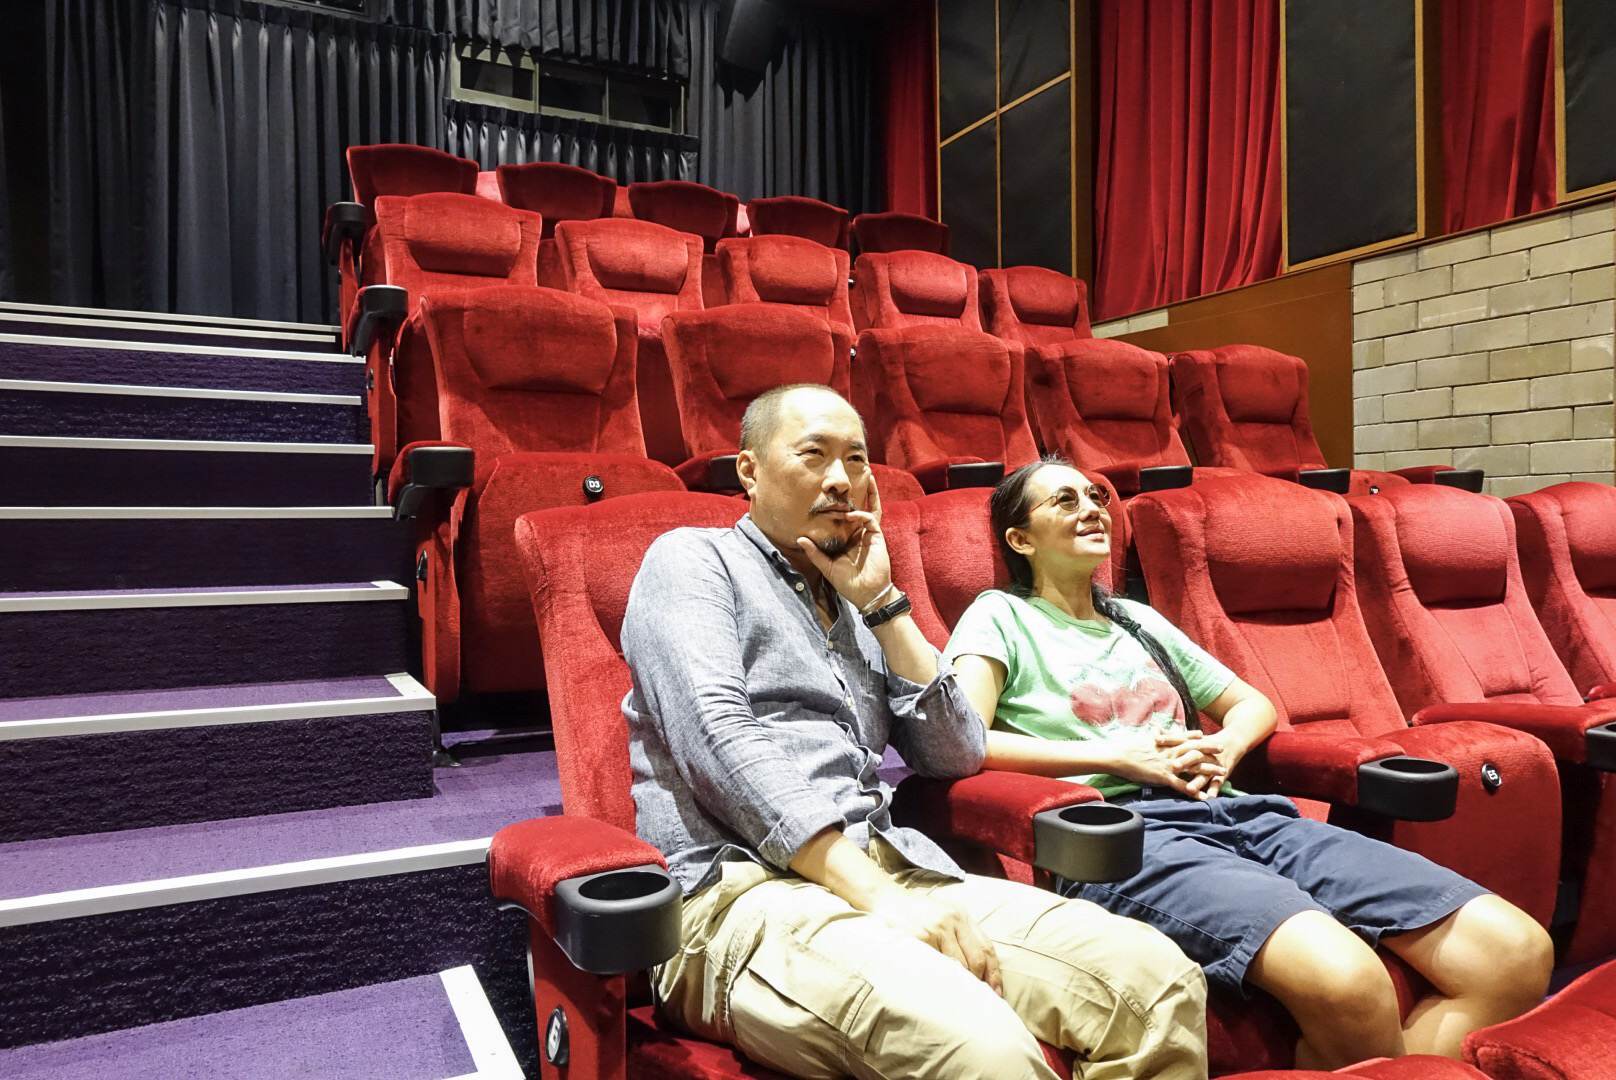 Makers of Banned Films Ready Arthouse Theater For Bangkok